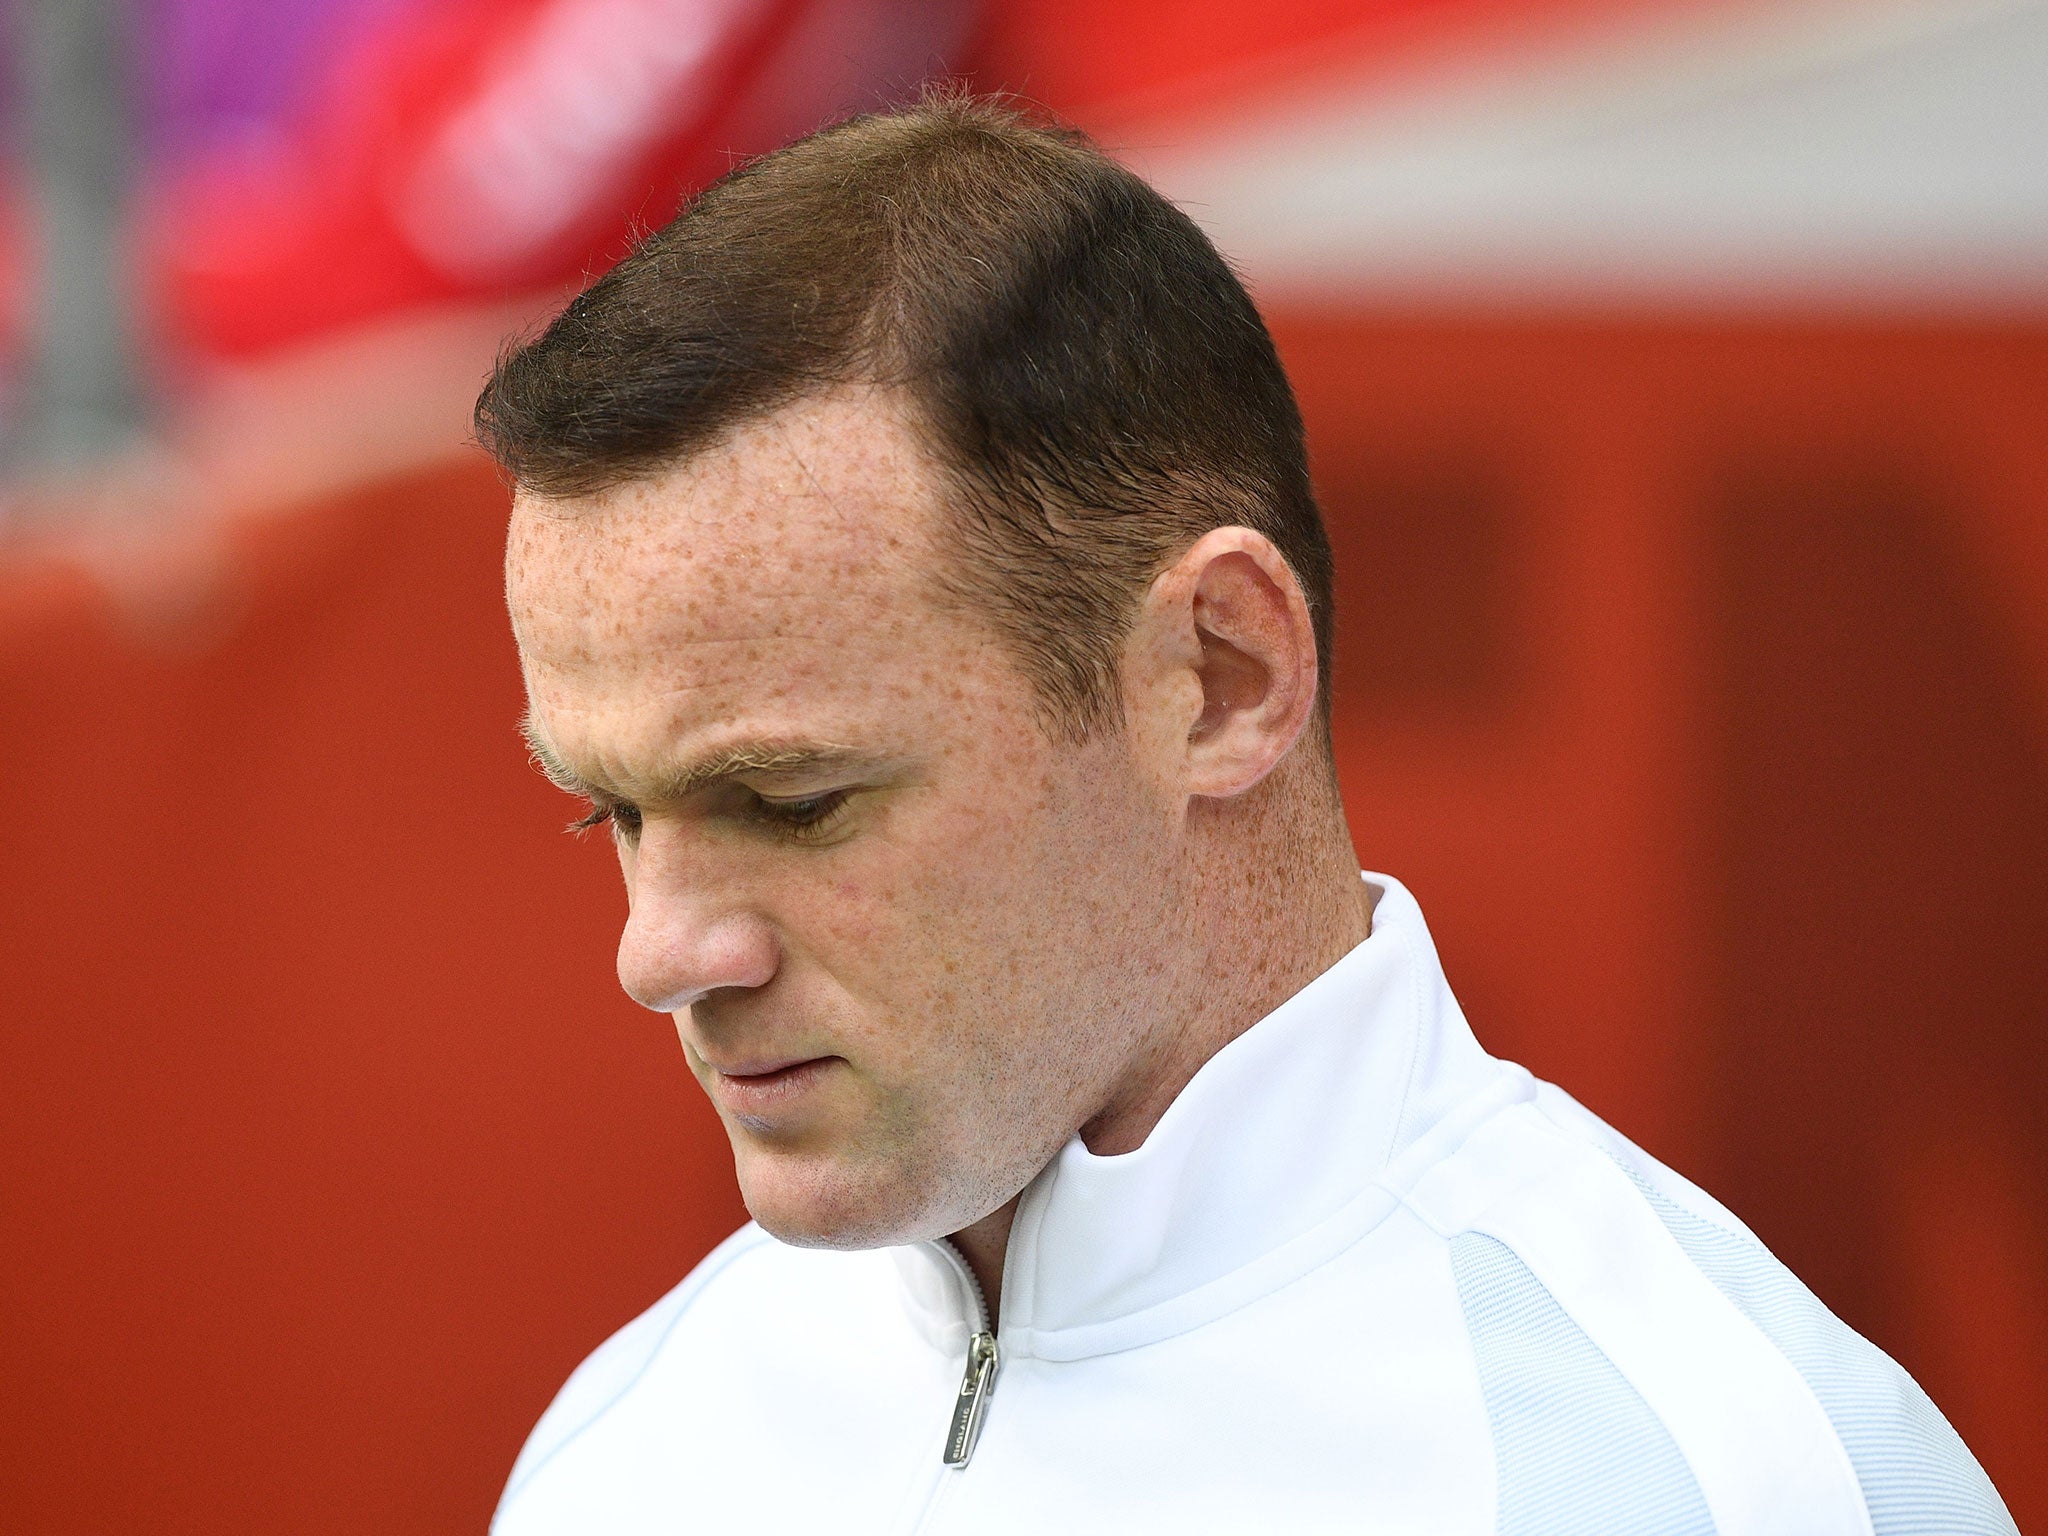 Wayne Rooney was booed off by sections of fans following Saturday's game against Malta